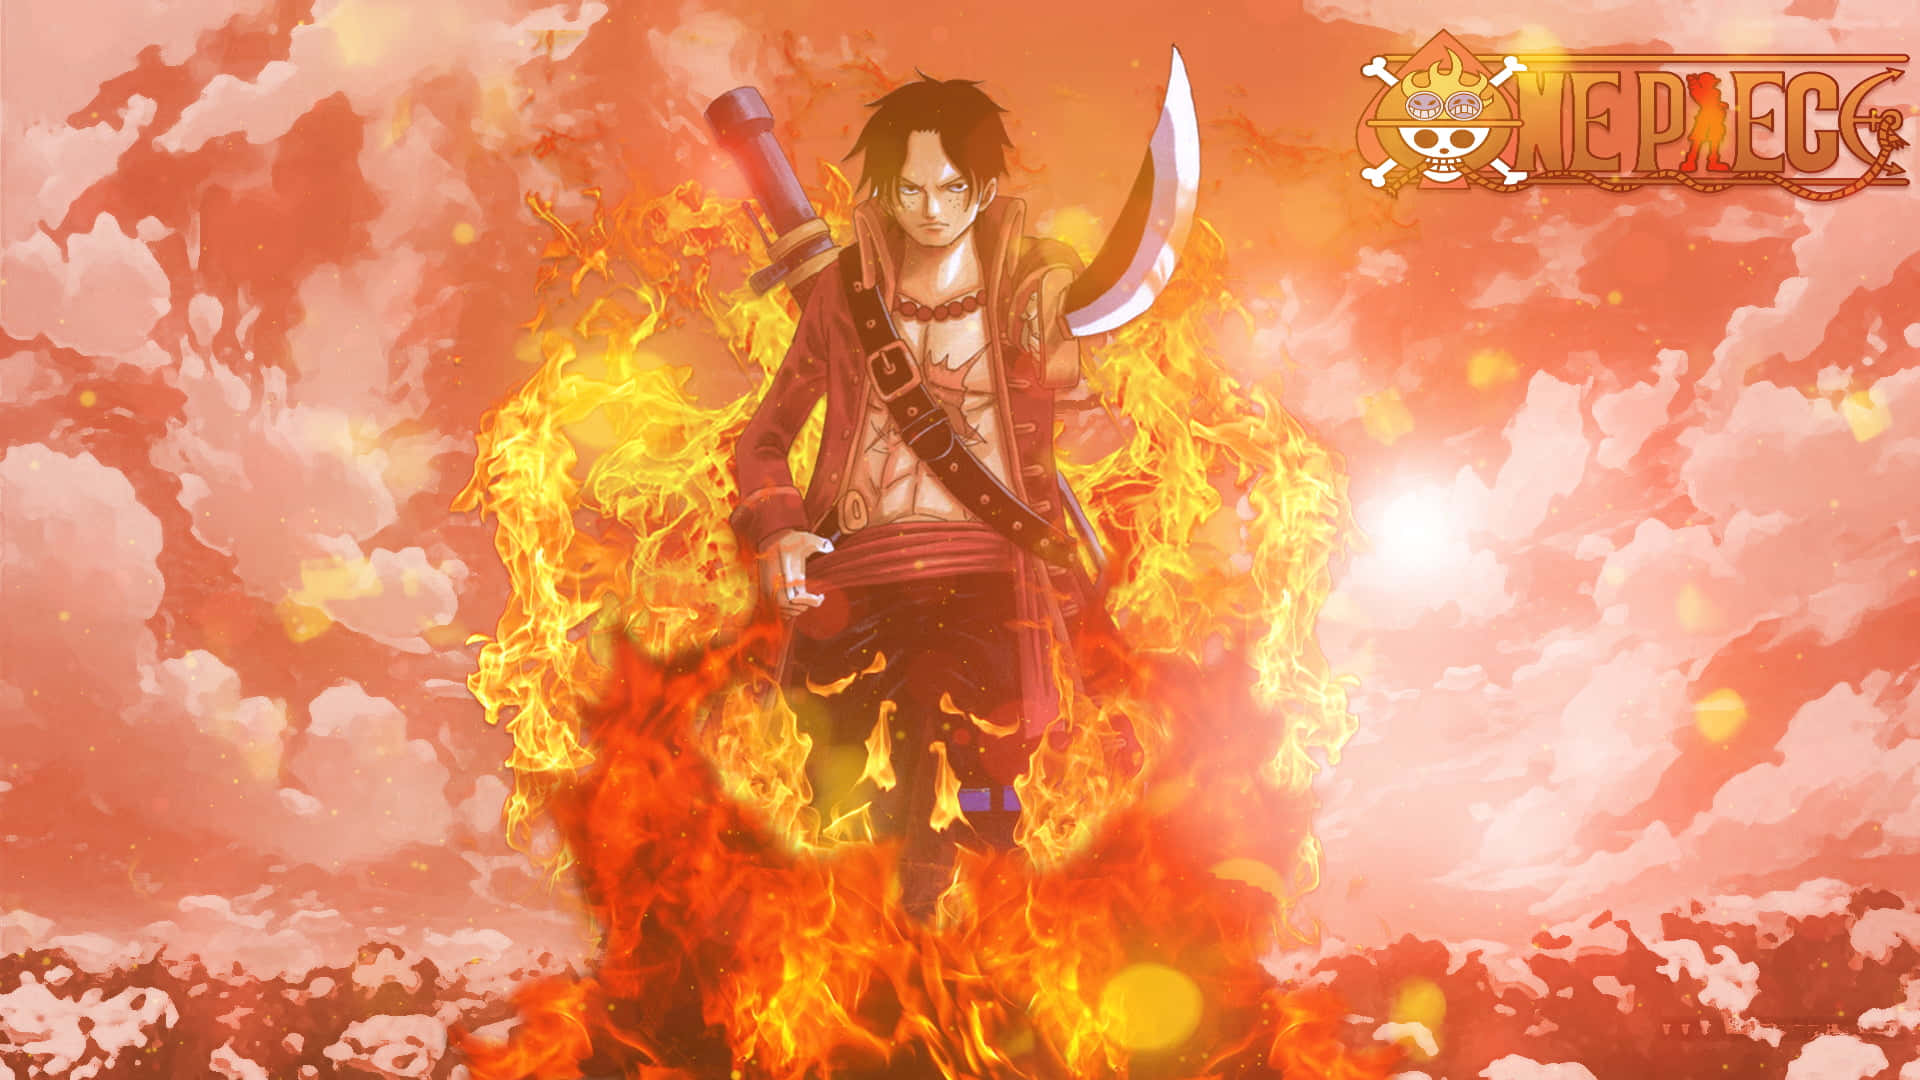 Portgas D Ace, The Fiery Pirate From One Piece.